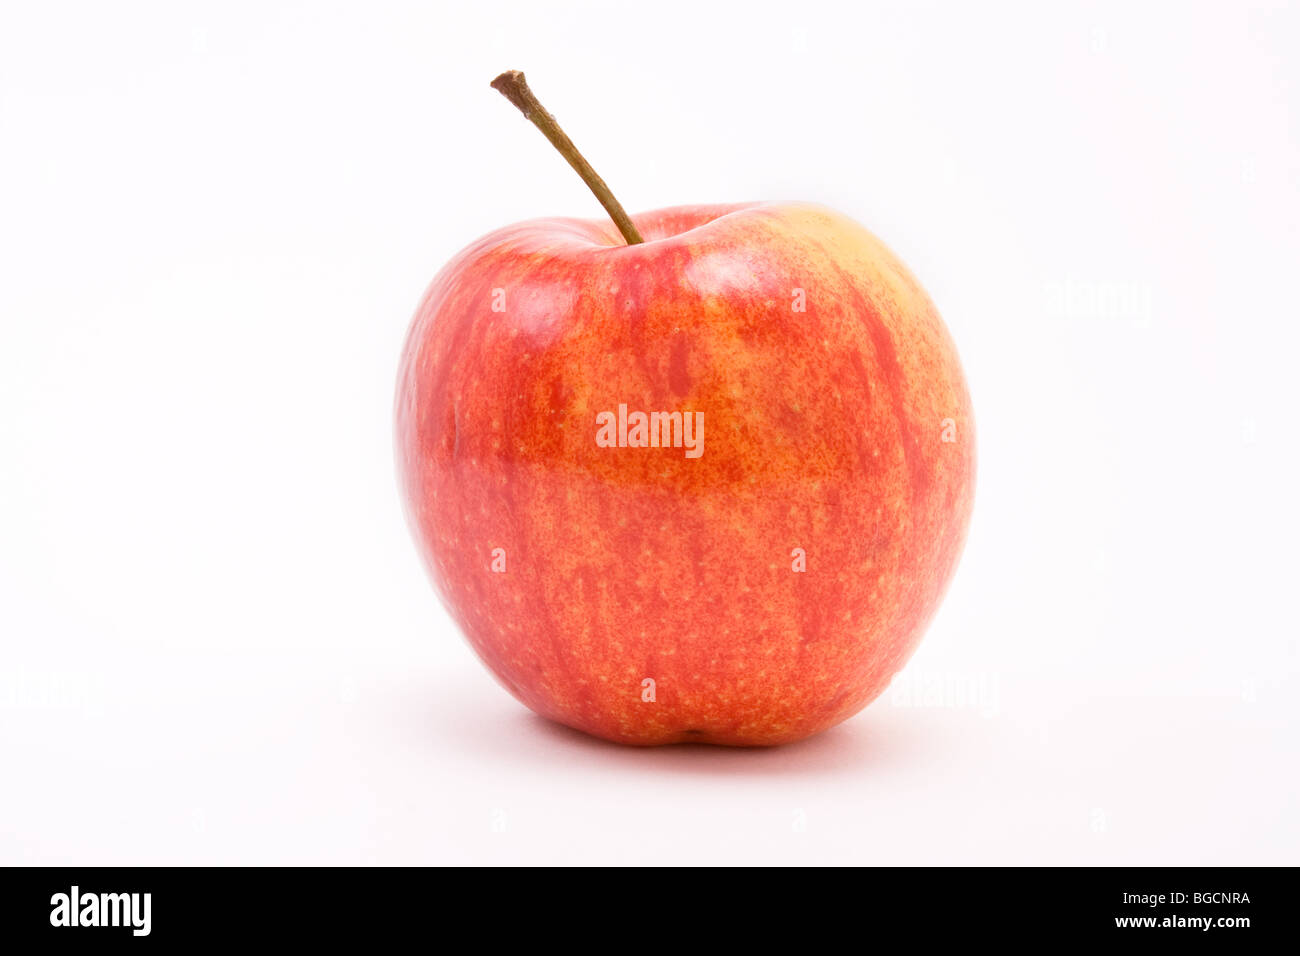 Golden red apple against white background. A jonagold cultivated from the Golden delicious. Stock Photo